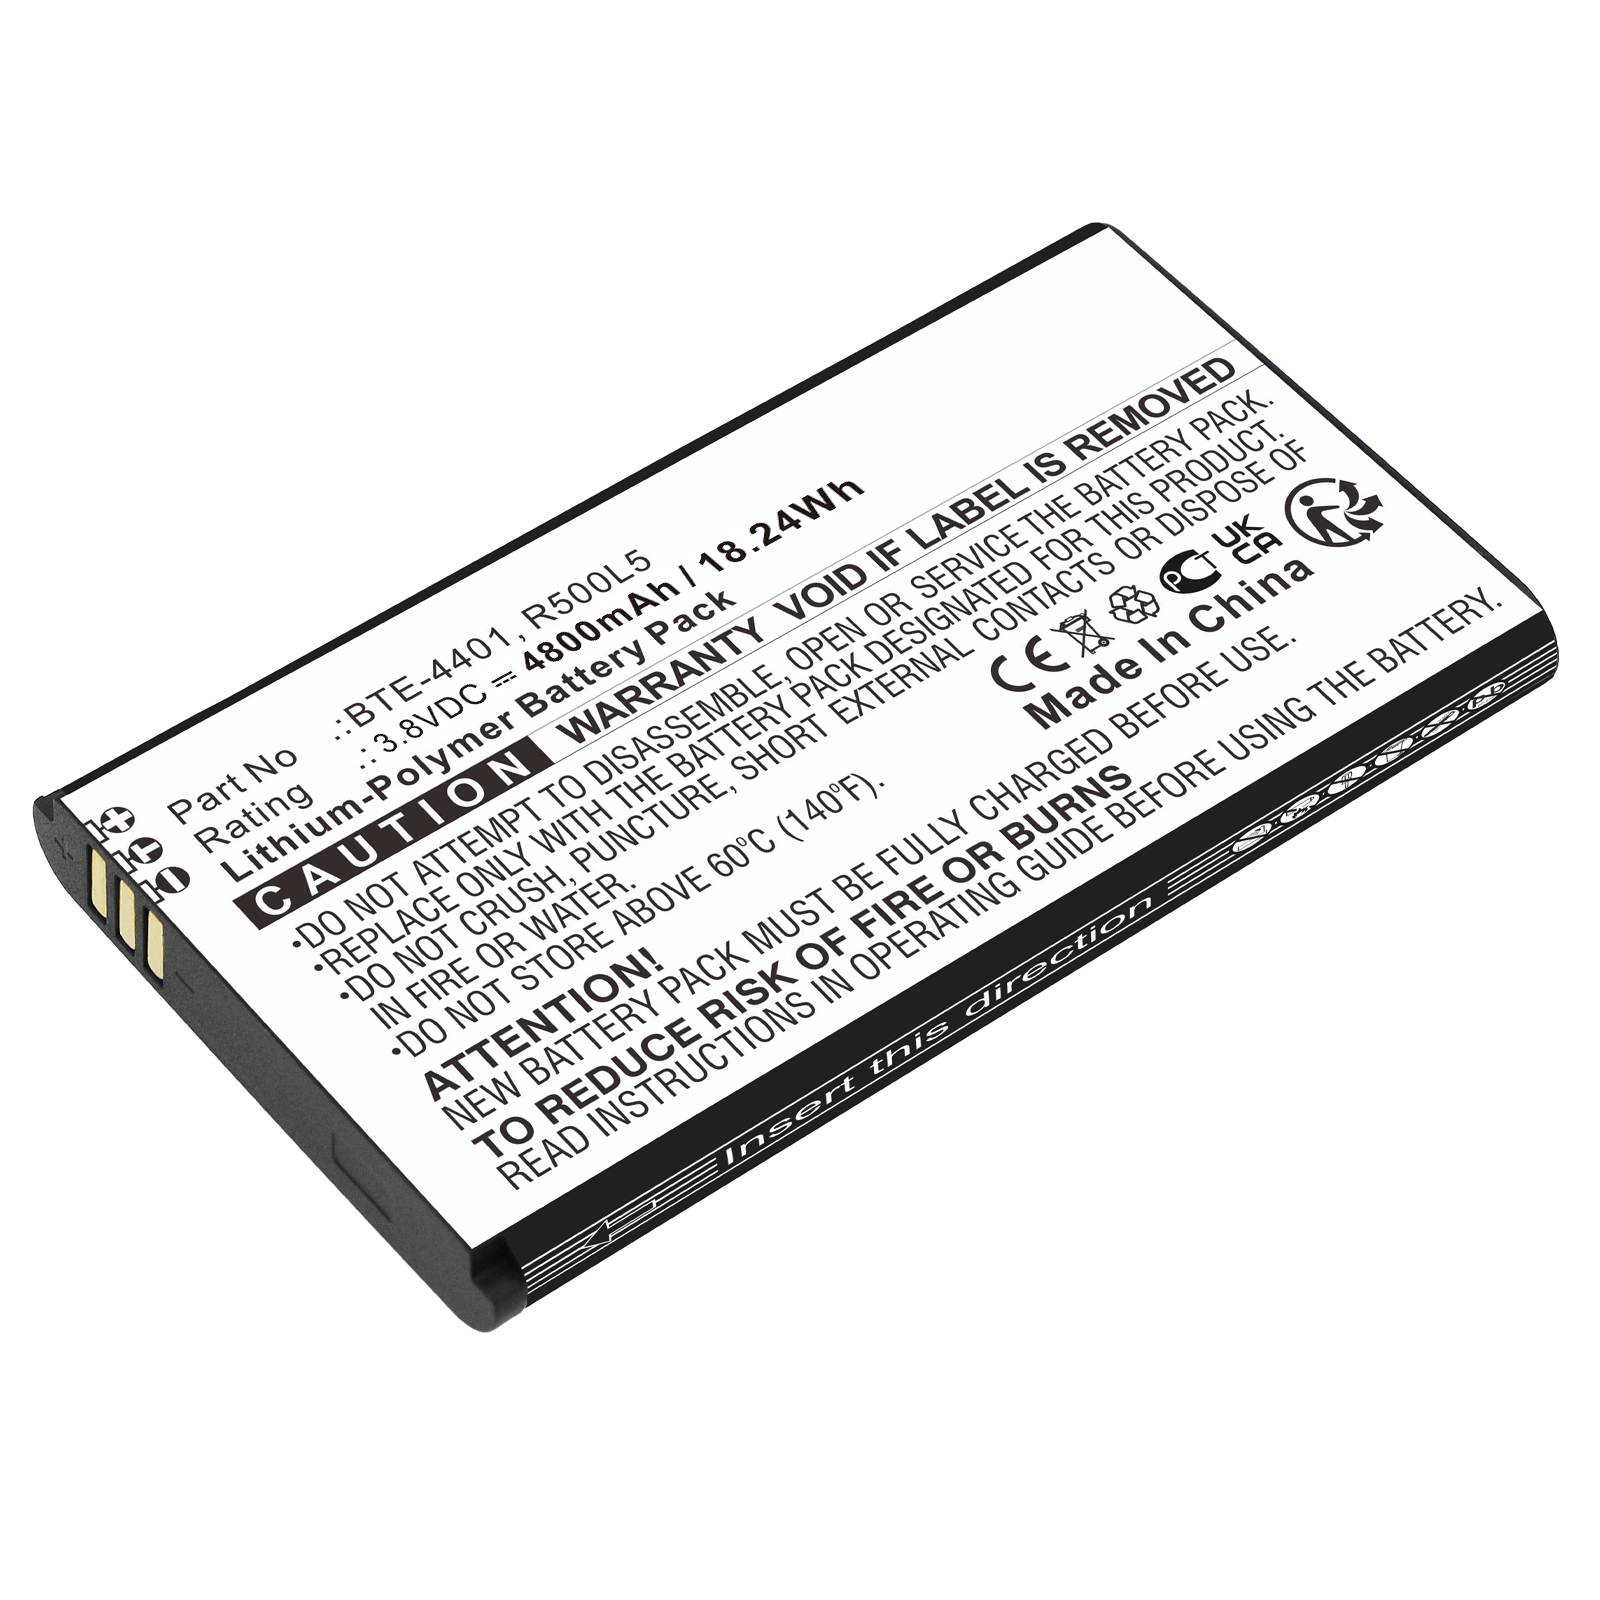 Batteries for OrbicWifi Hotspot